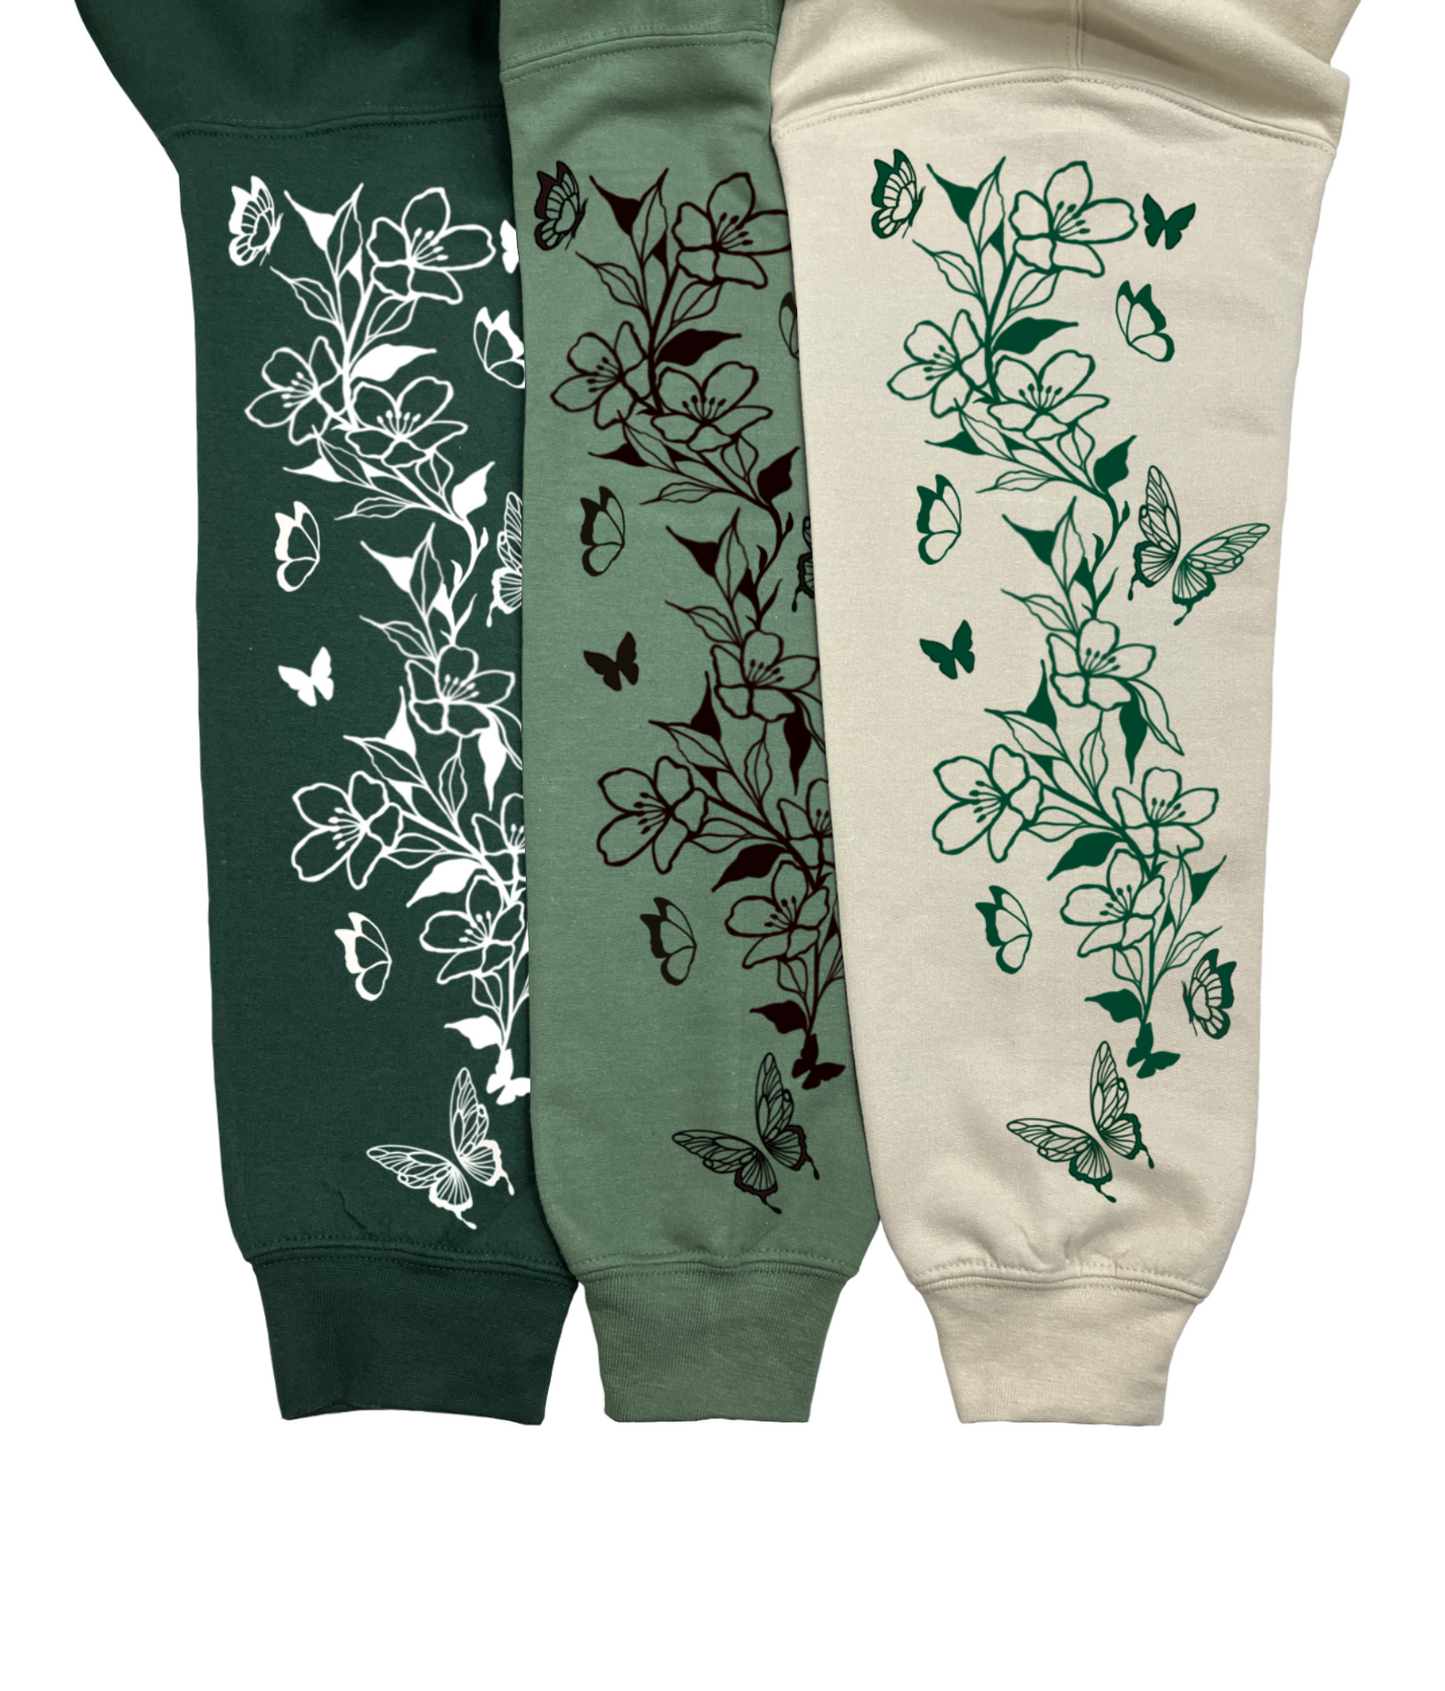 Statement floral butterfly sleeved sweatshirt- customisable